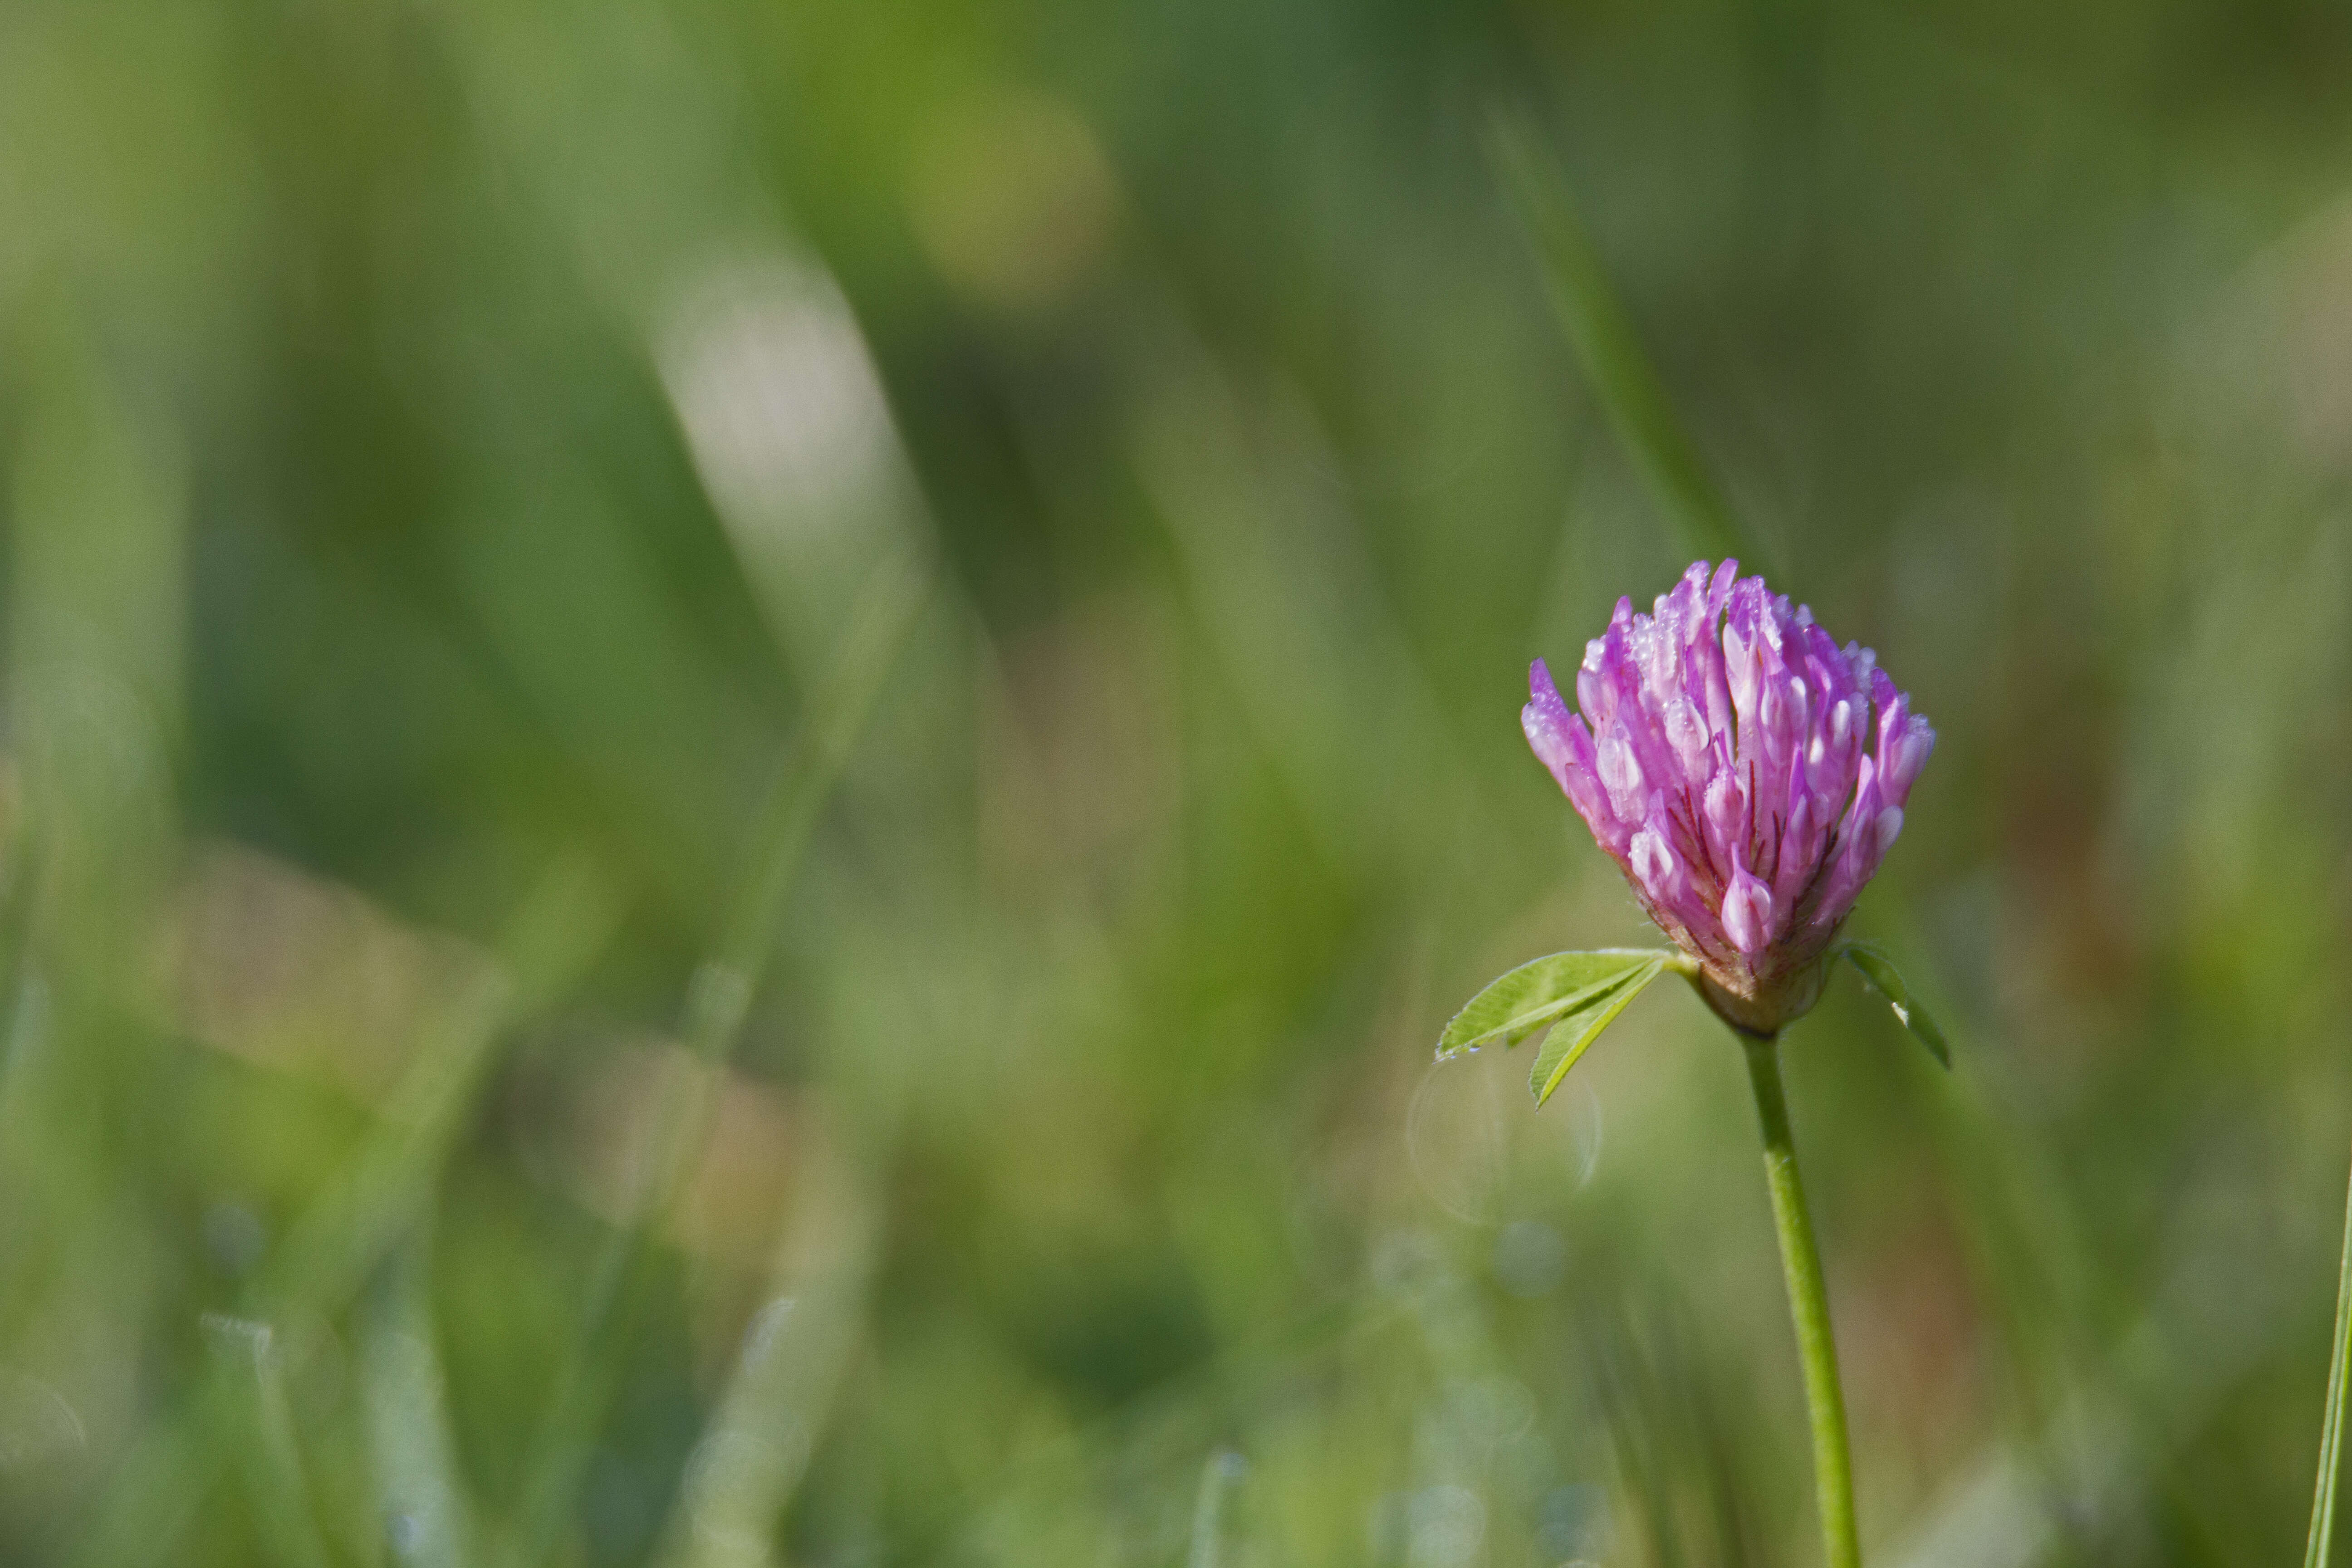 Image of Red Clover